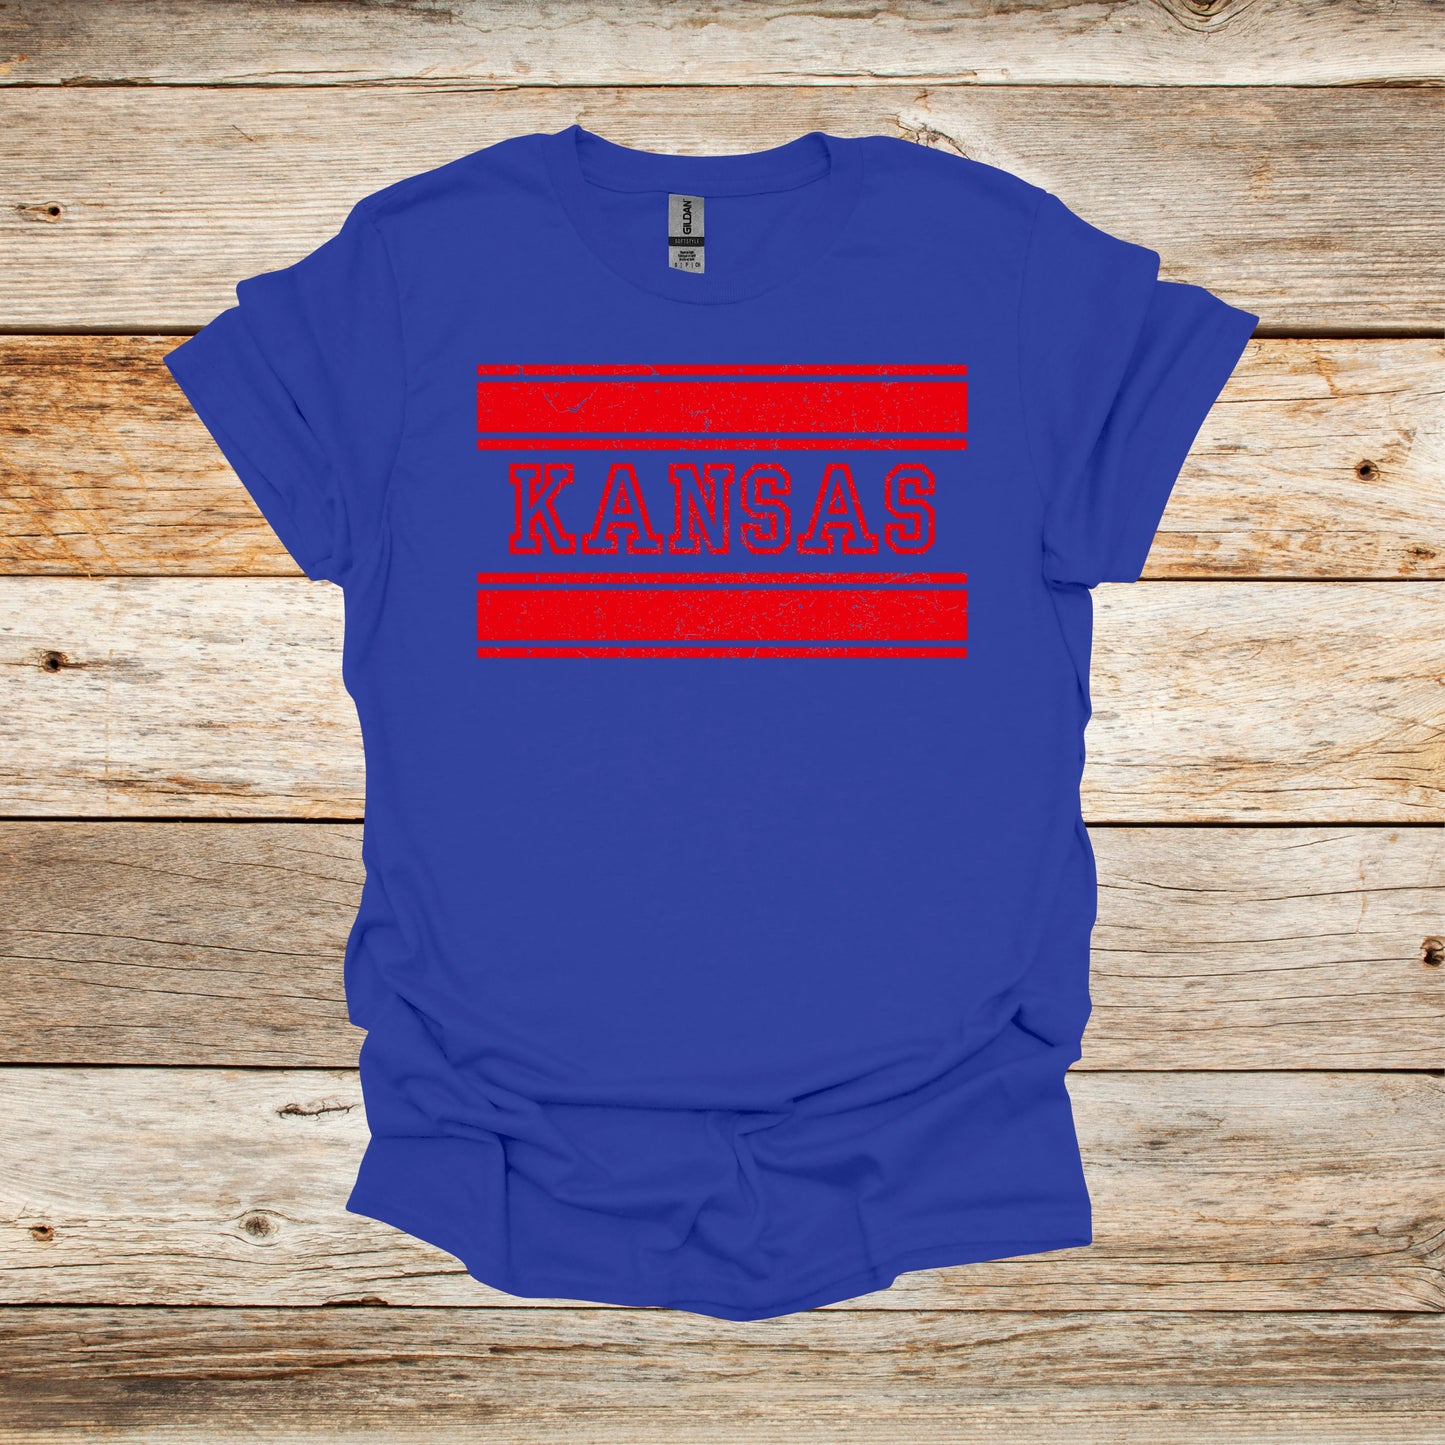 College T Shirt - Kansas Jayhawks - Adult and Children's Tee Shirts T-Shirts Graphic Avenue Royal Adult Small 